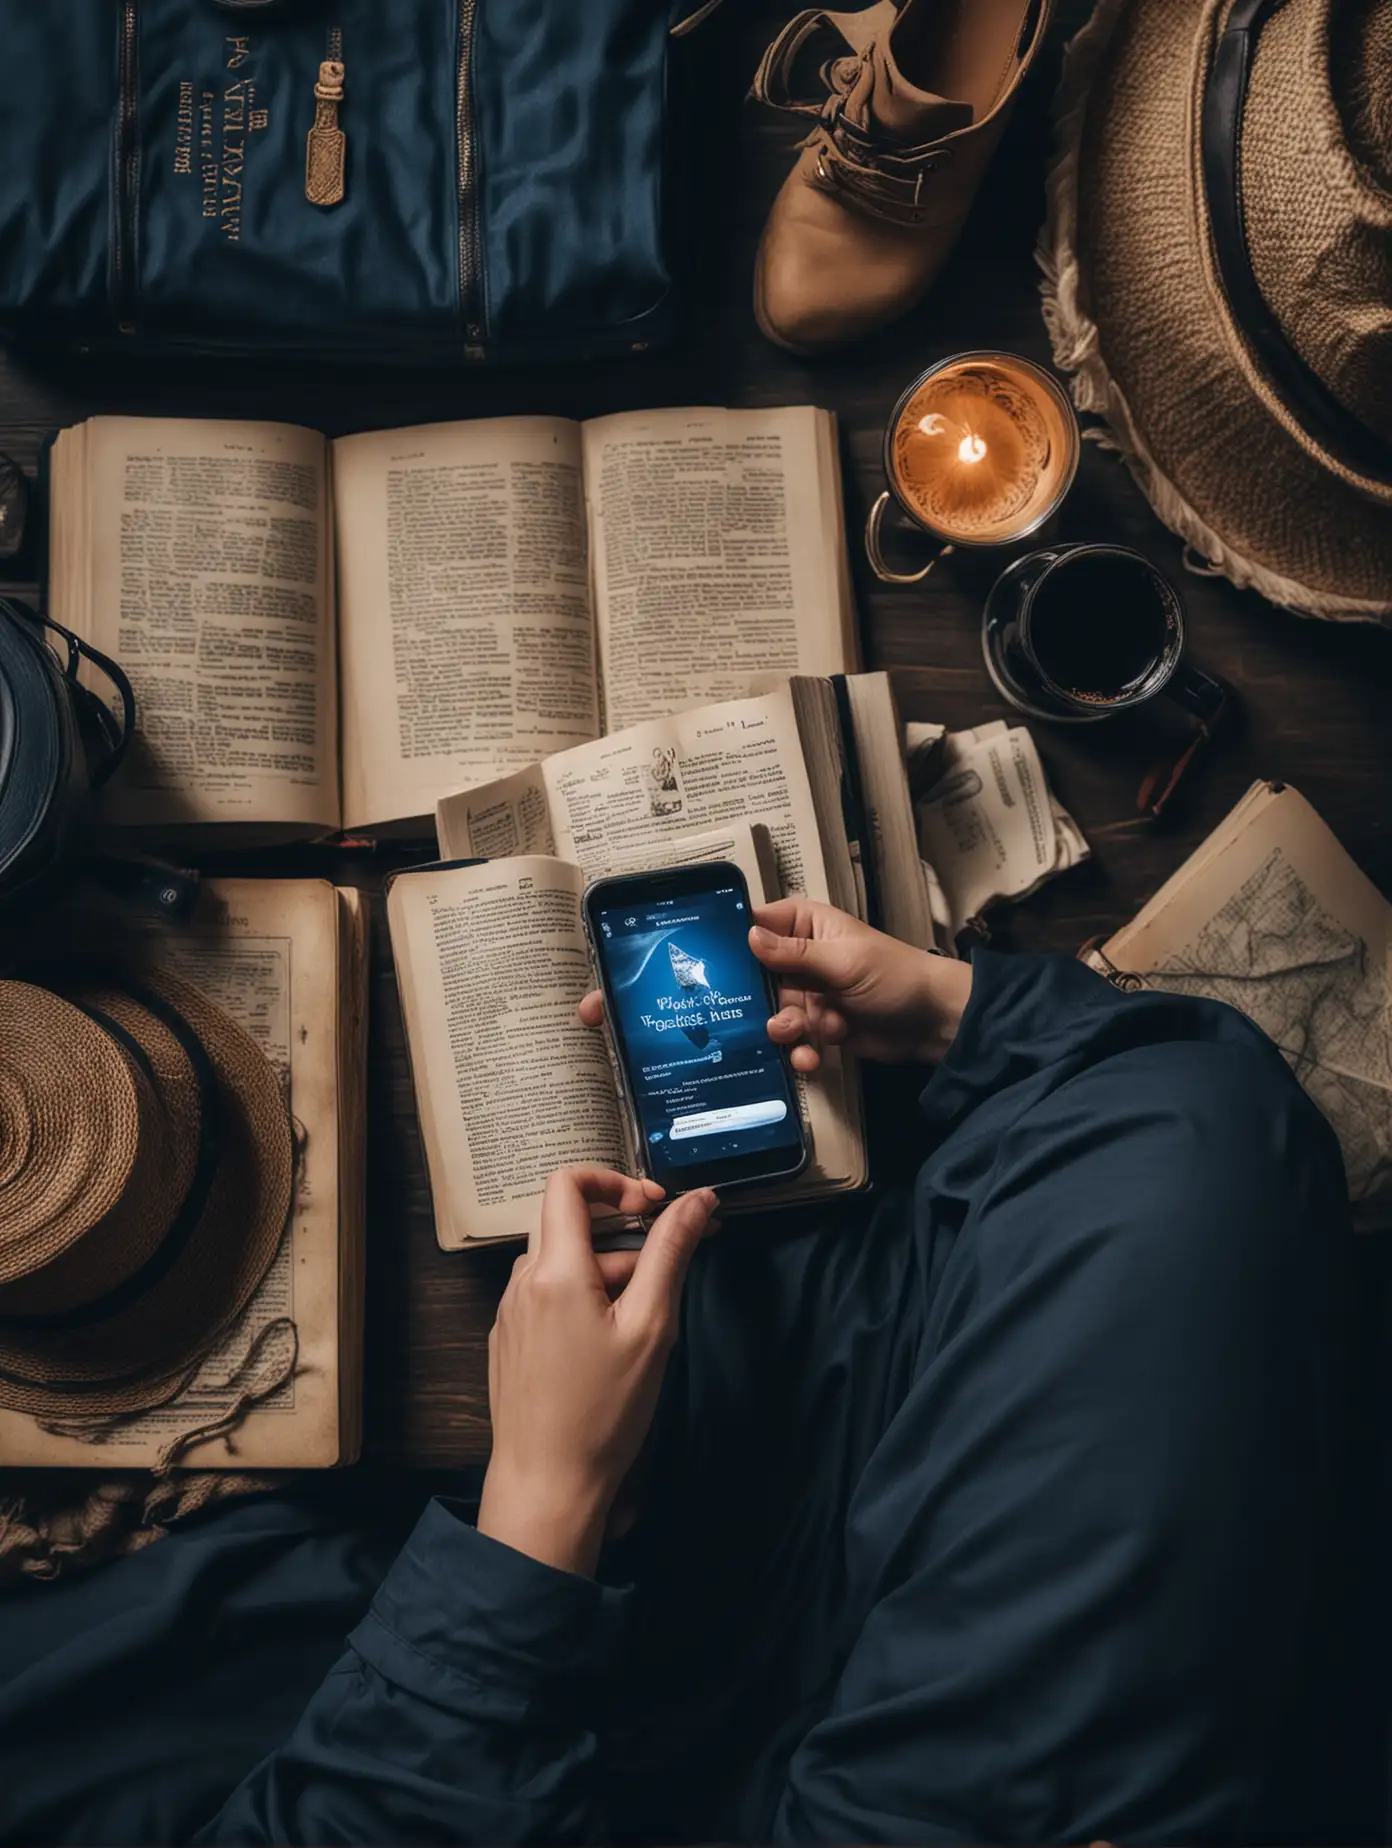 dark blue theme. Professional photo of a person reading many travel books on her smartphone